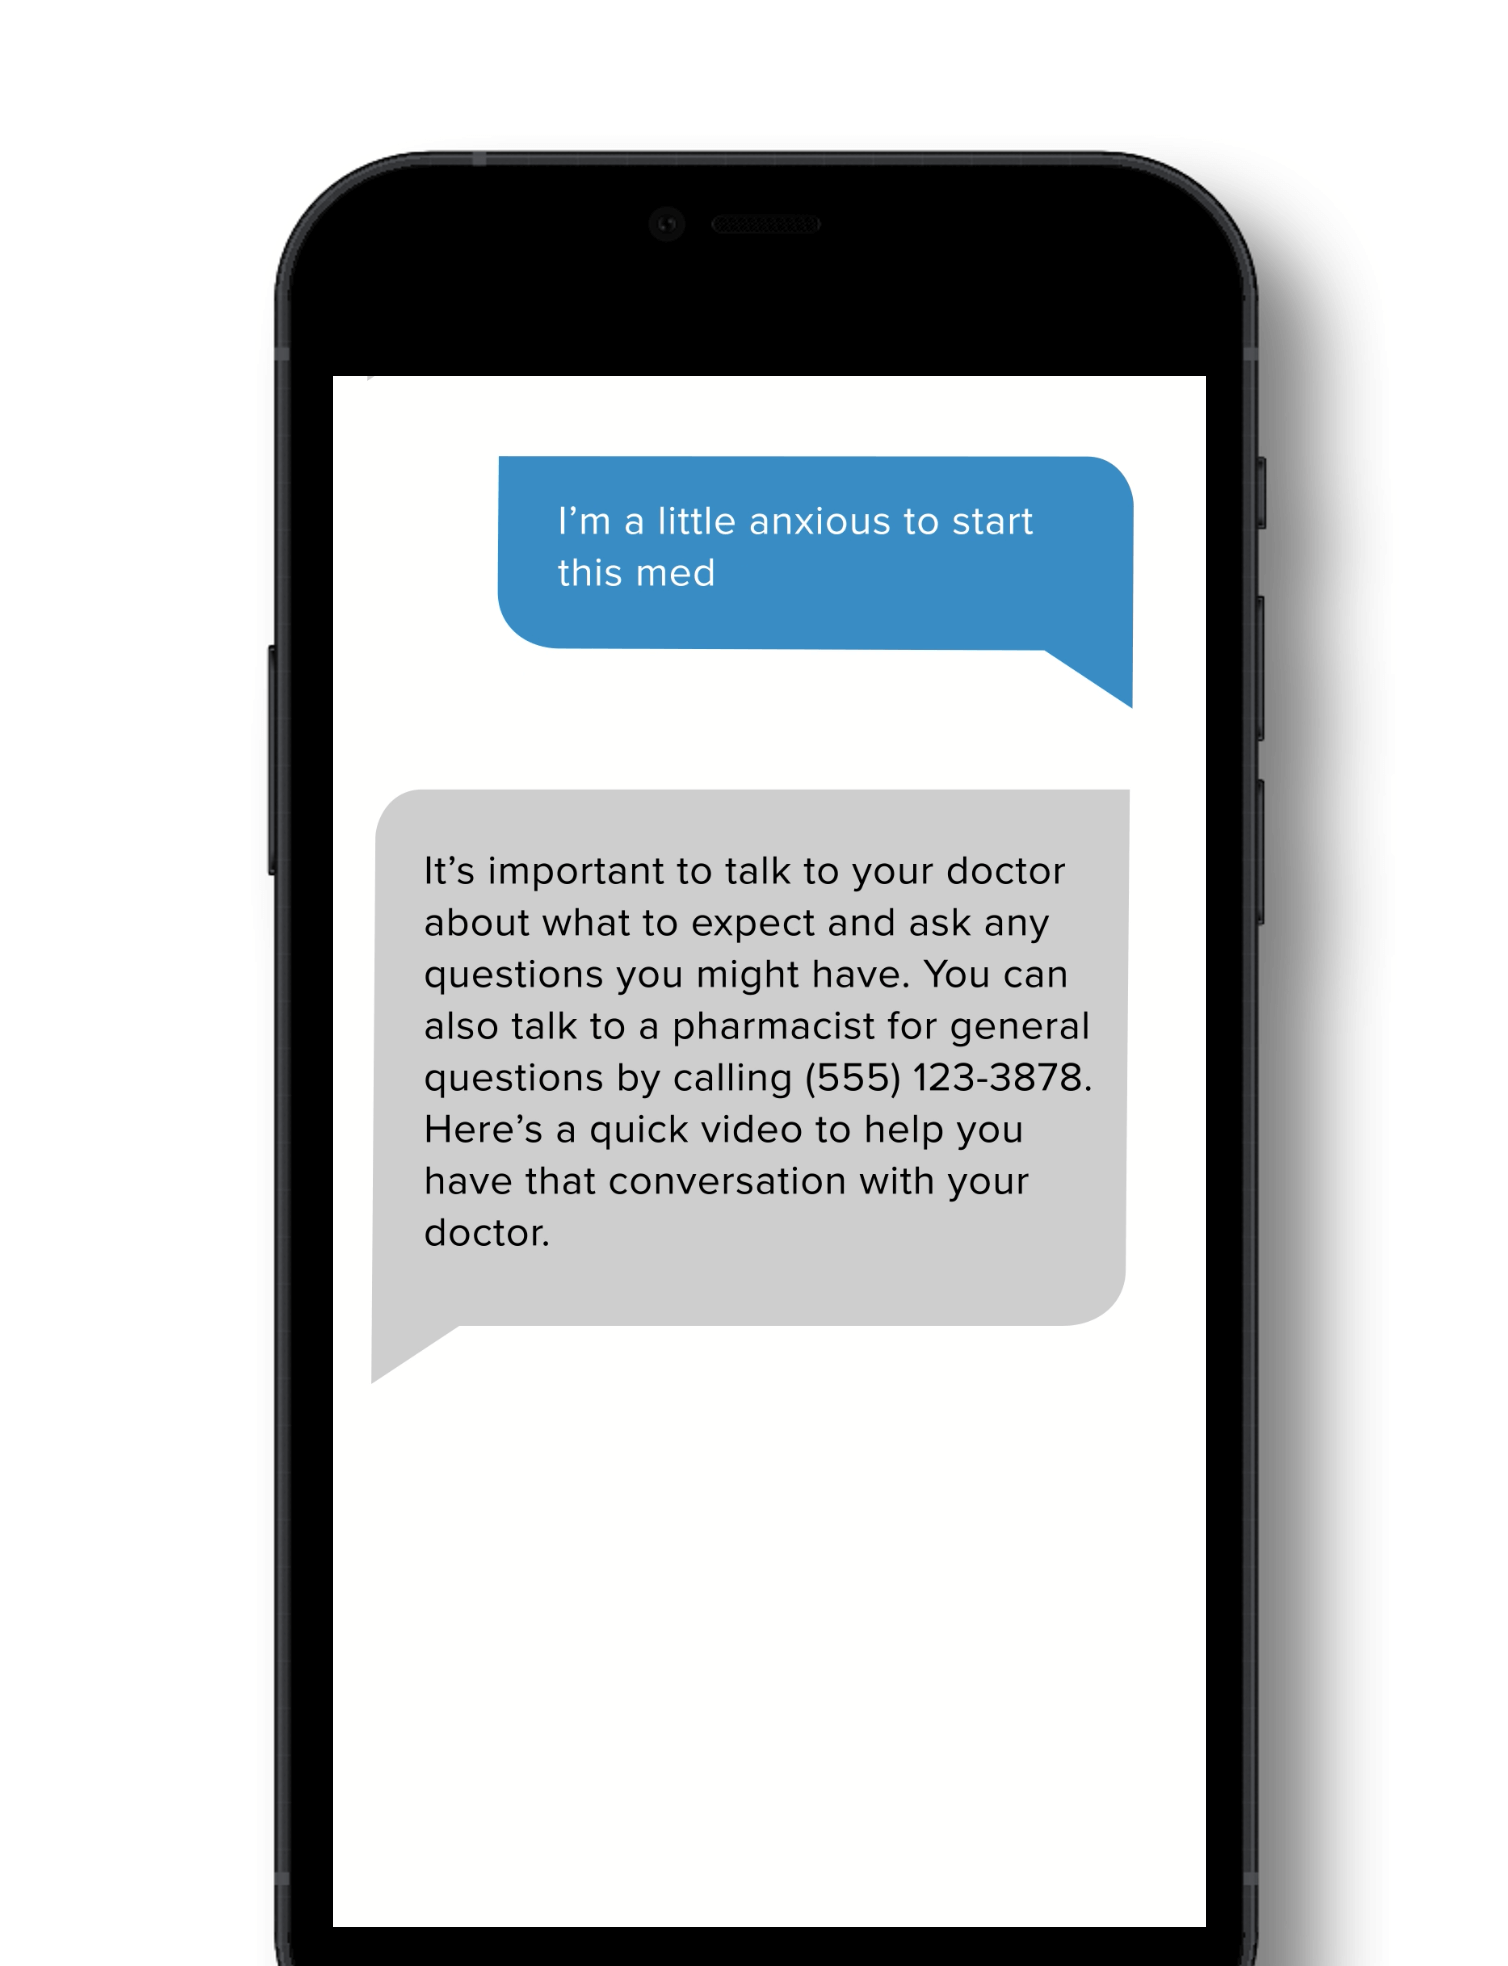 Example of our messaging content which uses behavioral science techniques designed to empower members to take health action